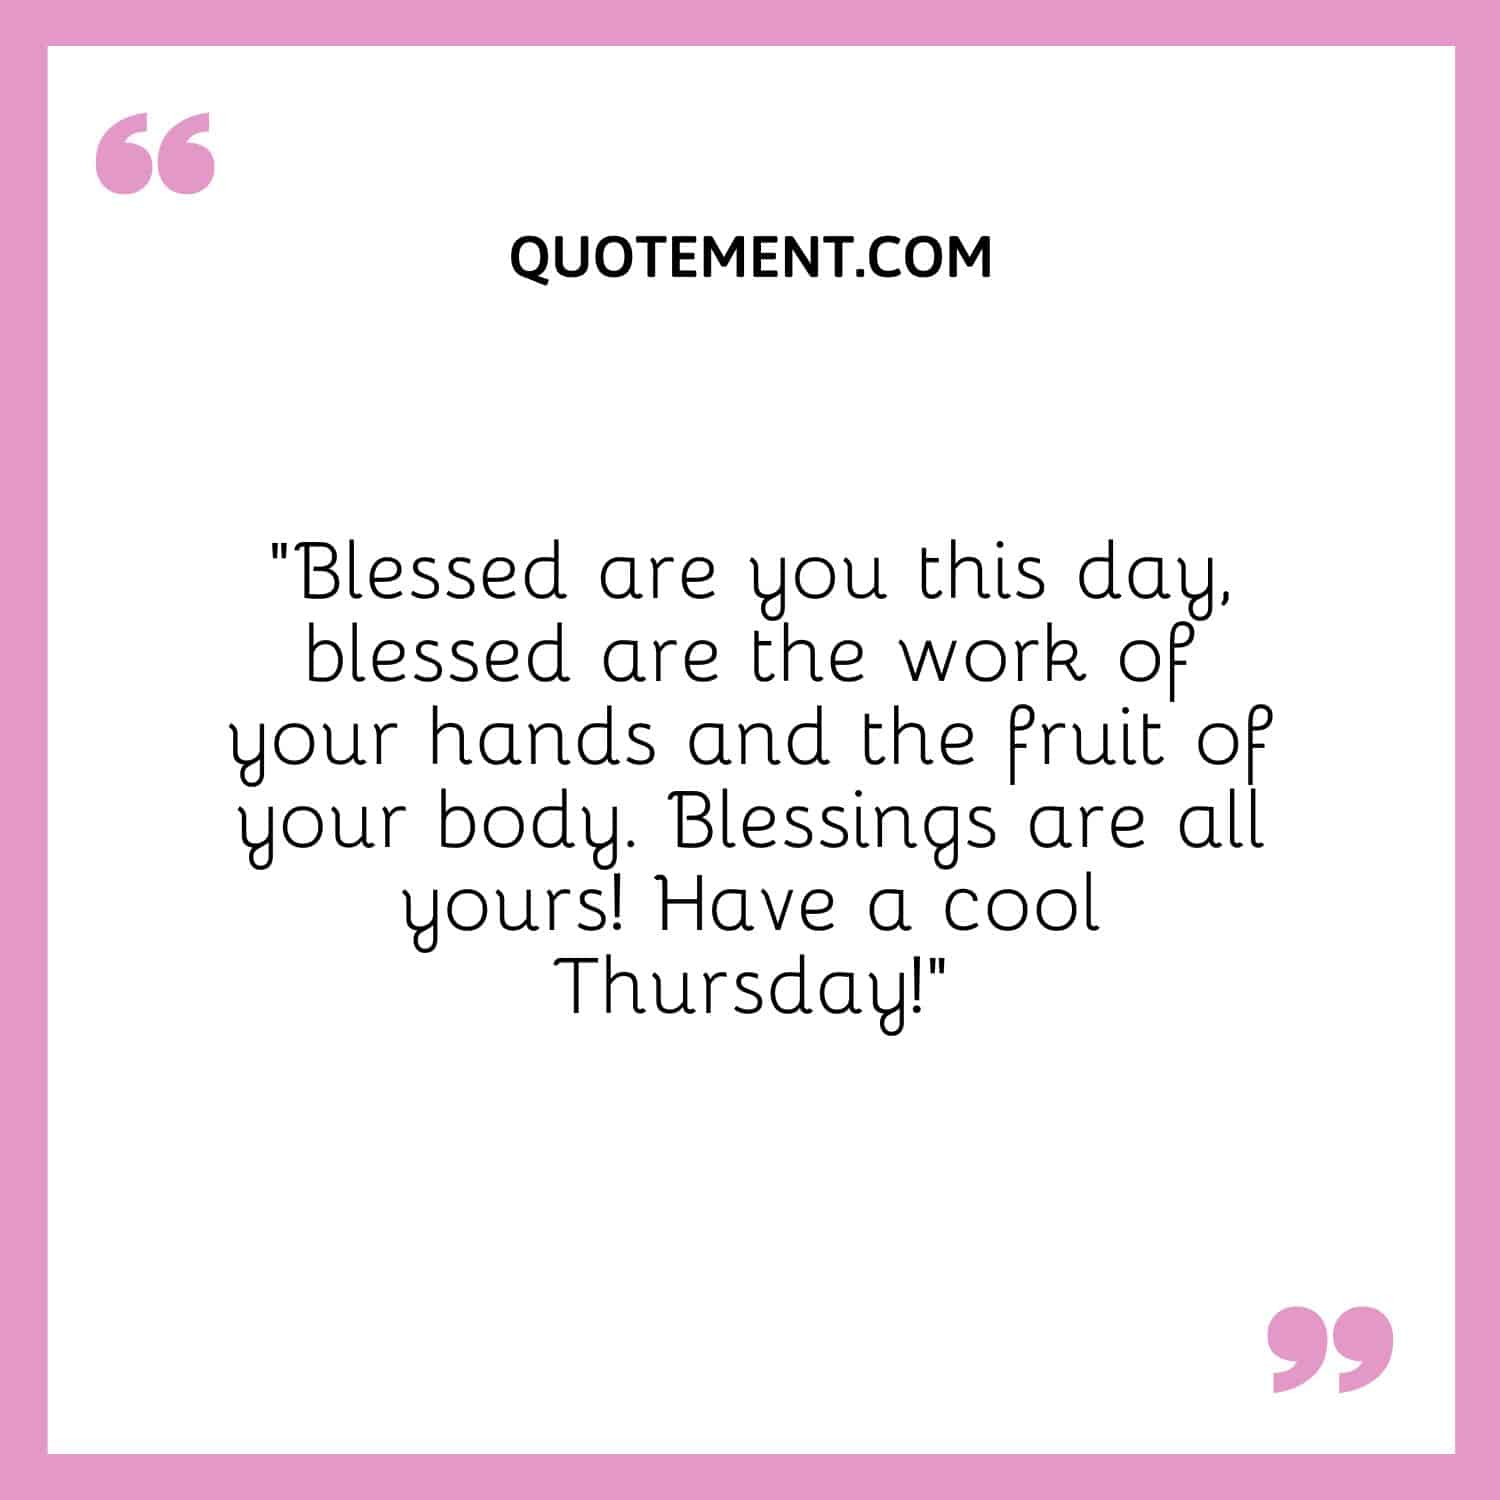 “Blessed are you this day, blessed are the work of your hands and the fruit of your body. Blessings are all yours! Have a cool Thursday!”